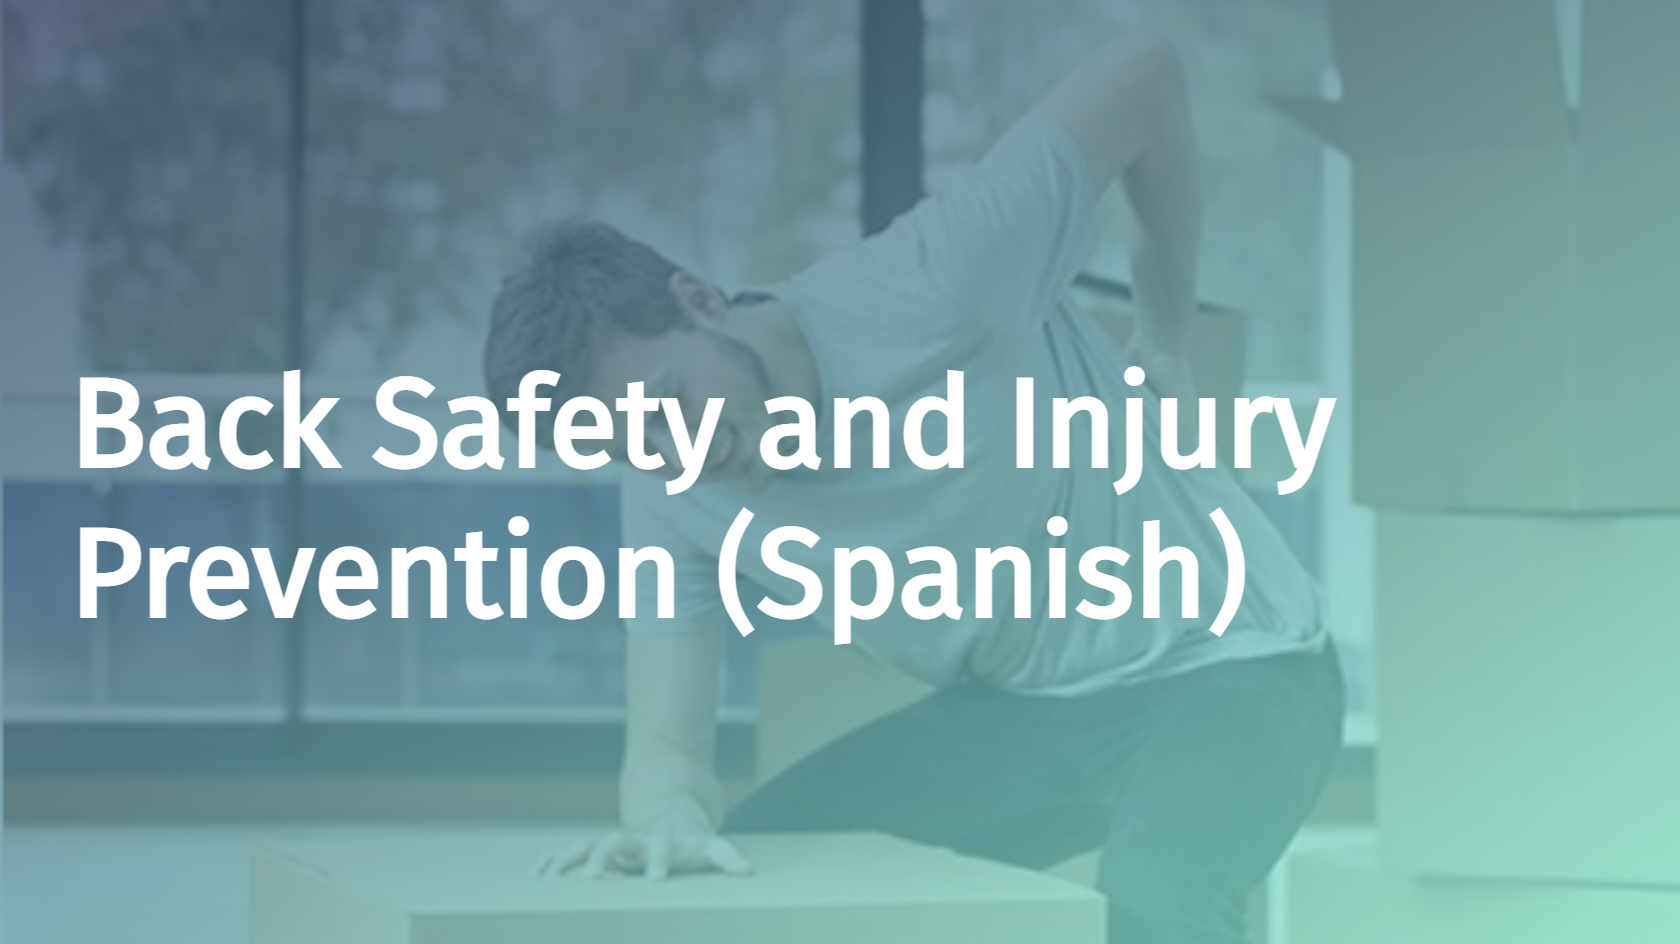 Spanish - Back Safety and Injury Prevention